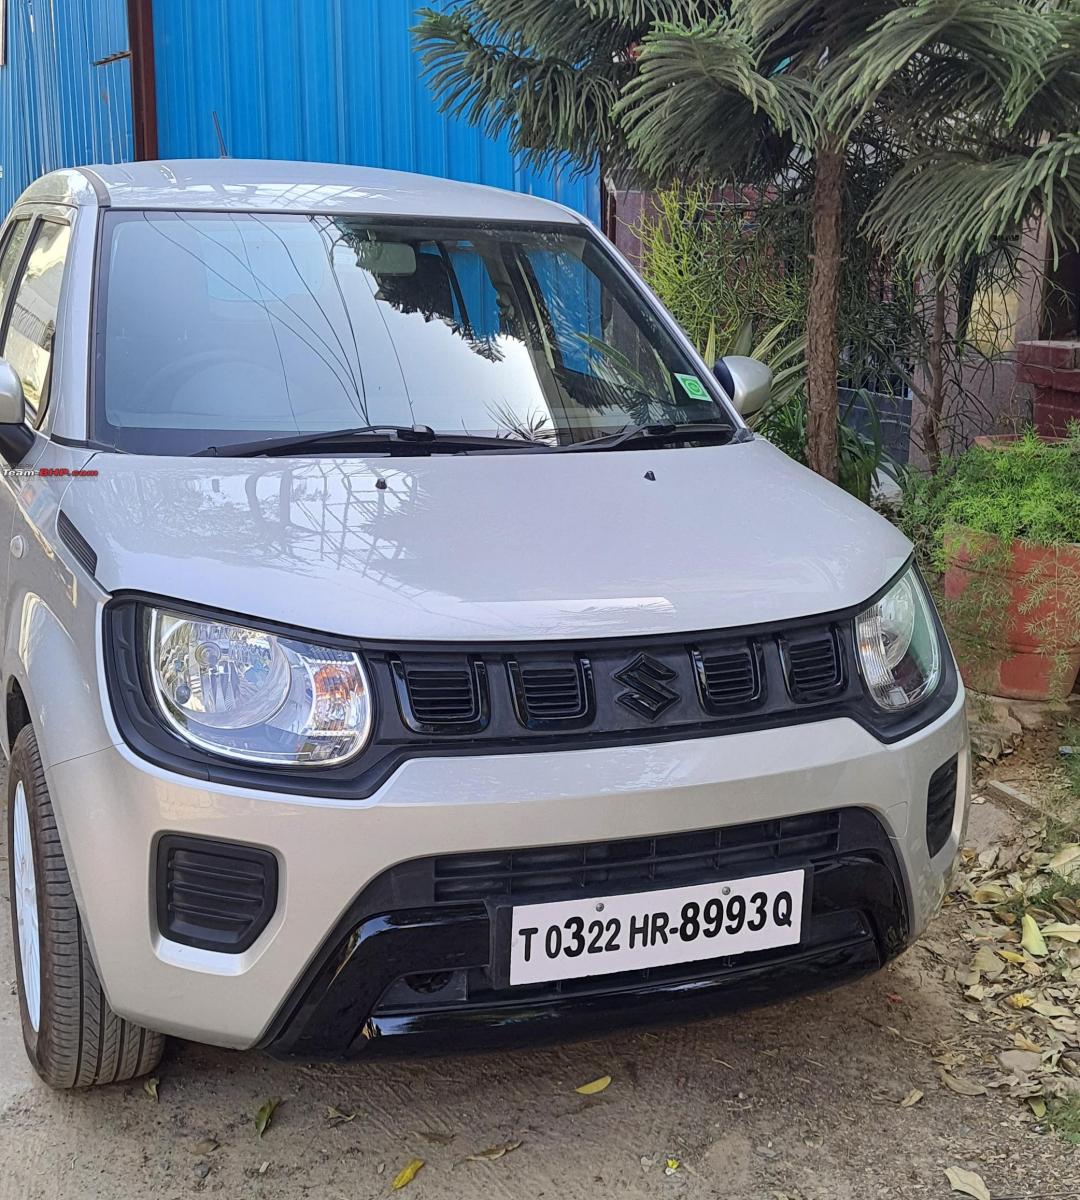 Modifying my Maruti Ignis: Wheels, suspension & other aesthetic changes, Indian, Maruti Suzuki, Member Content, Ignis, Car ownership, Modifications